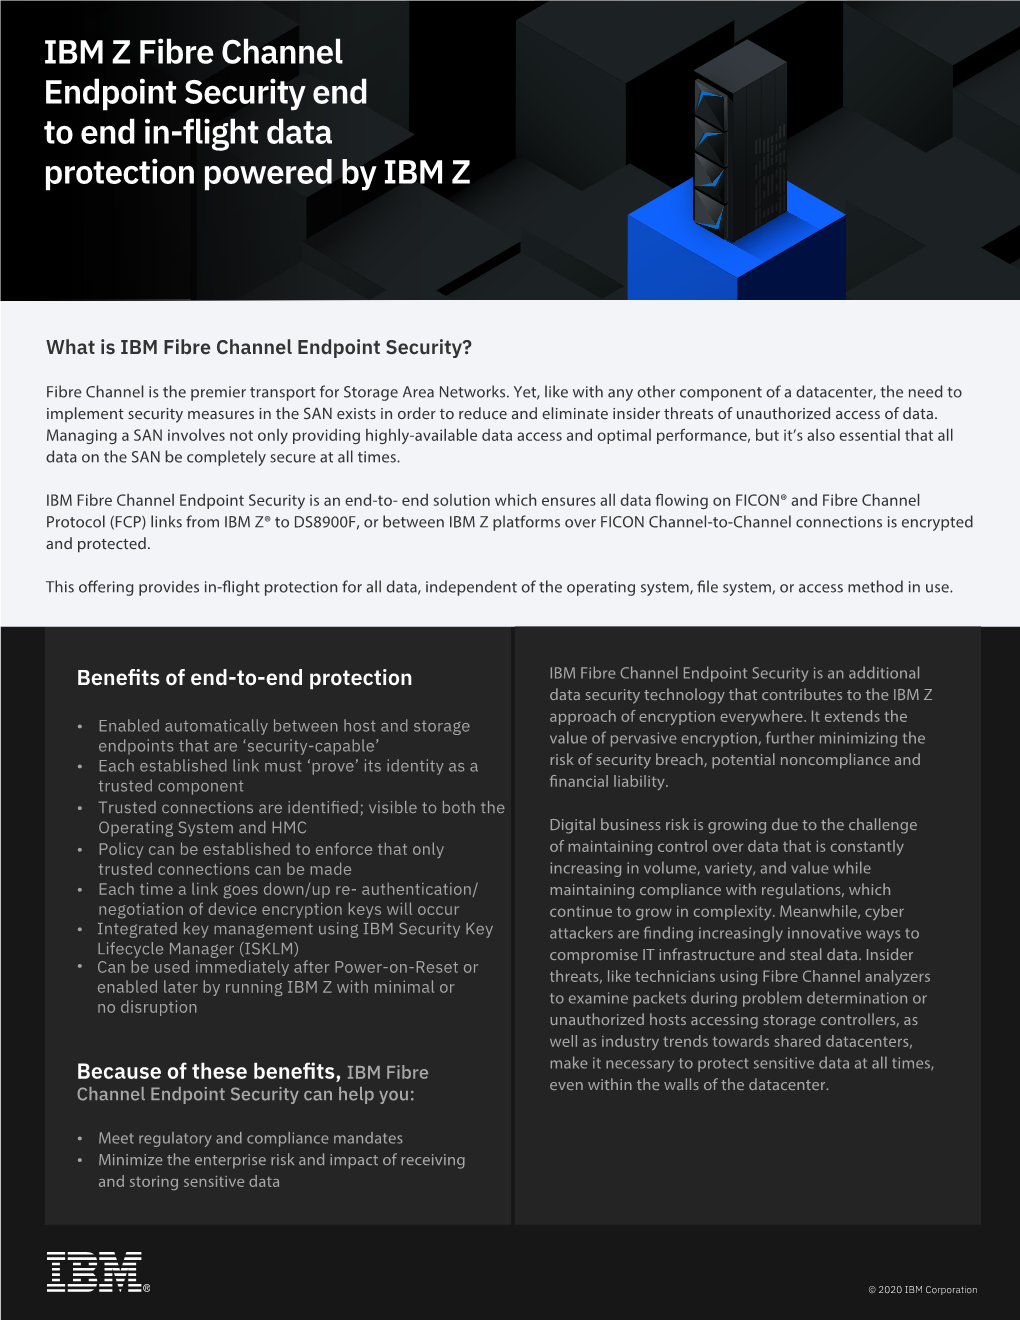 IBM Z Fibre Channel Endpoint Security End to End In-Flight Data Protection Powered by IBM Z